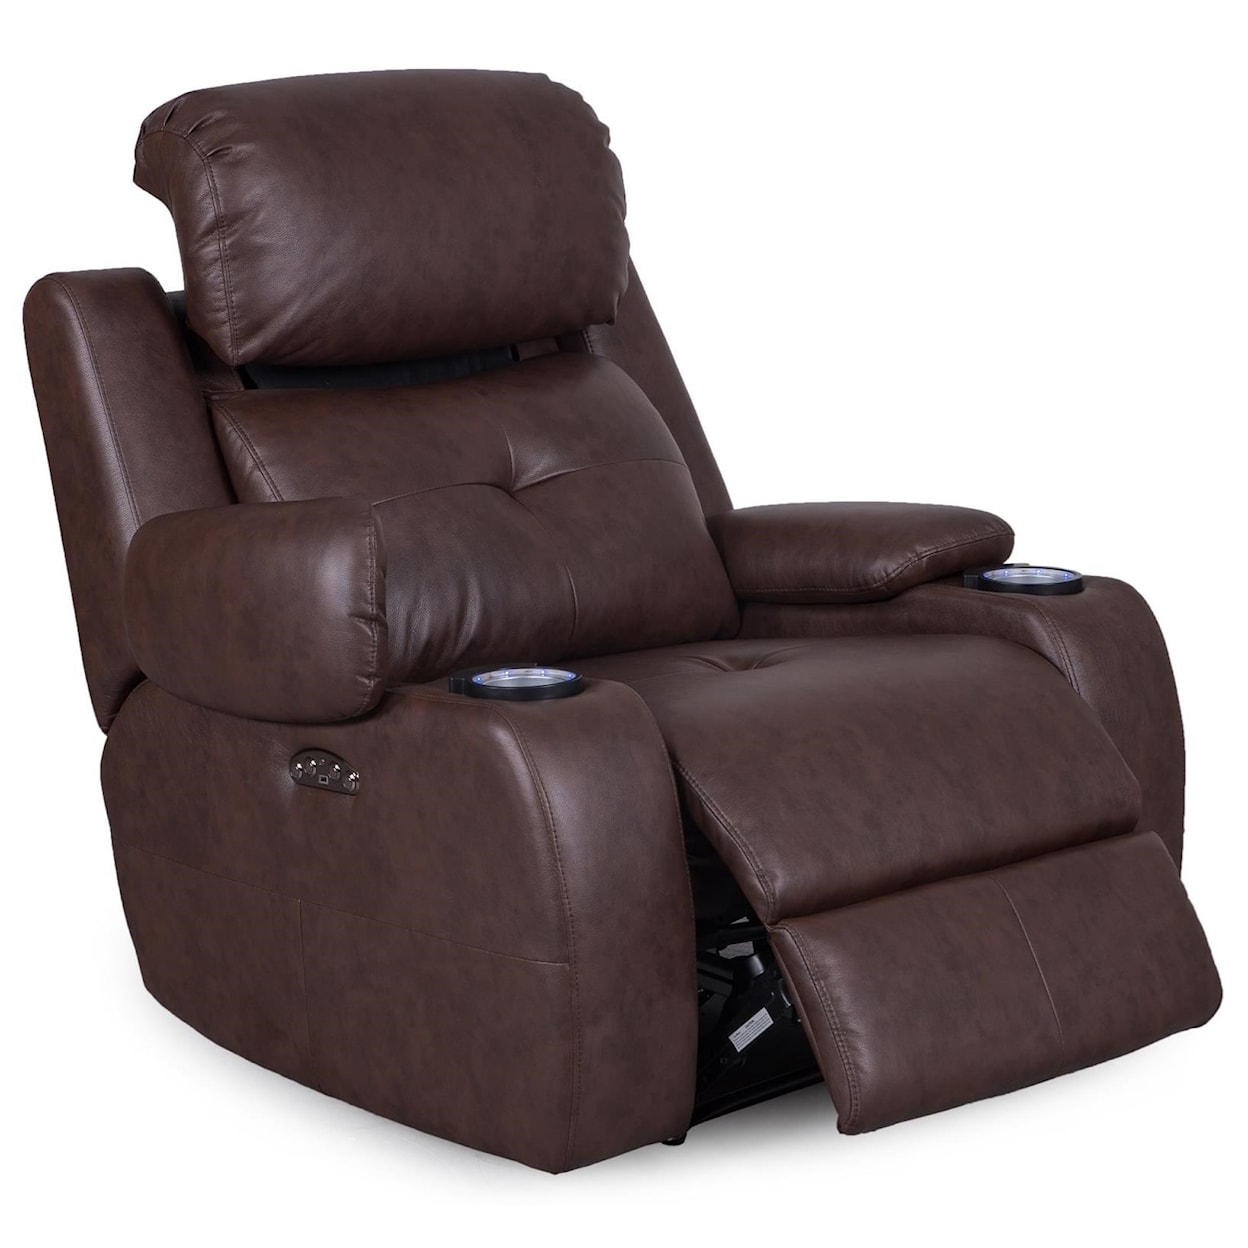 Synergy Home Furnishings 446 Recliner